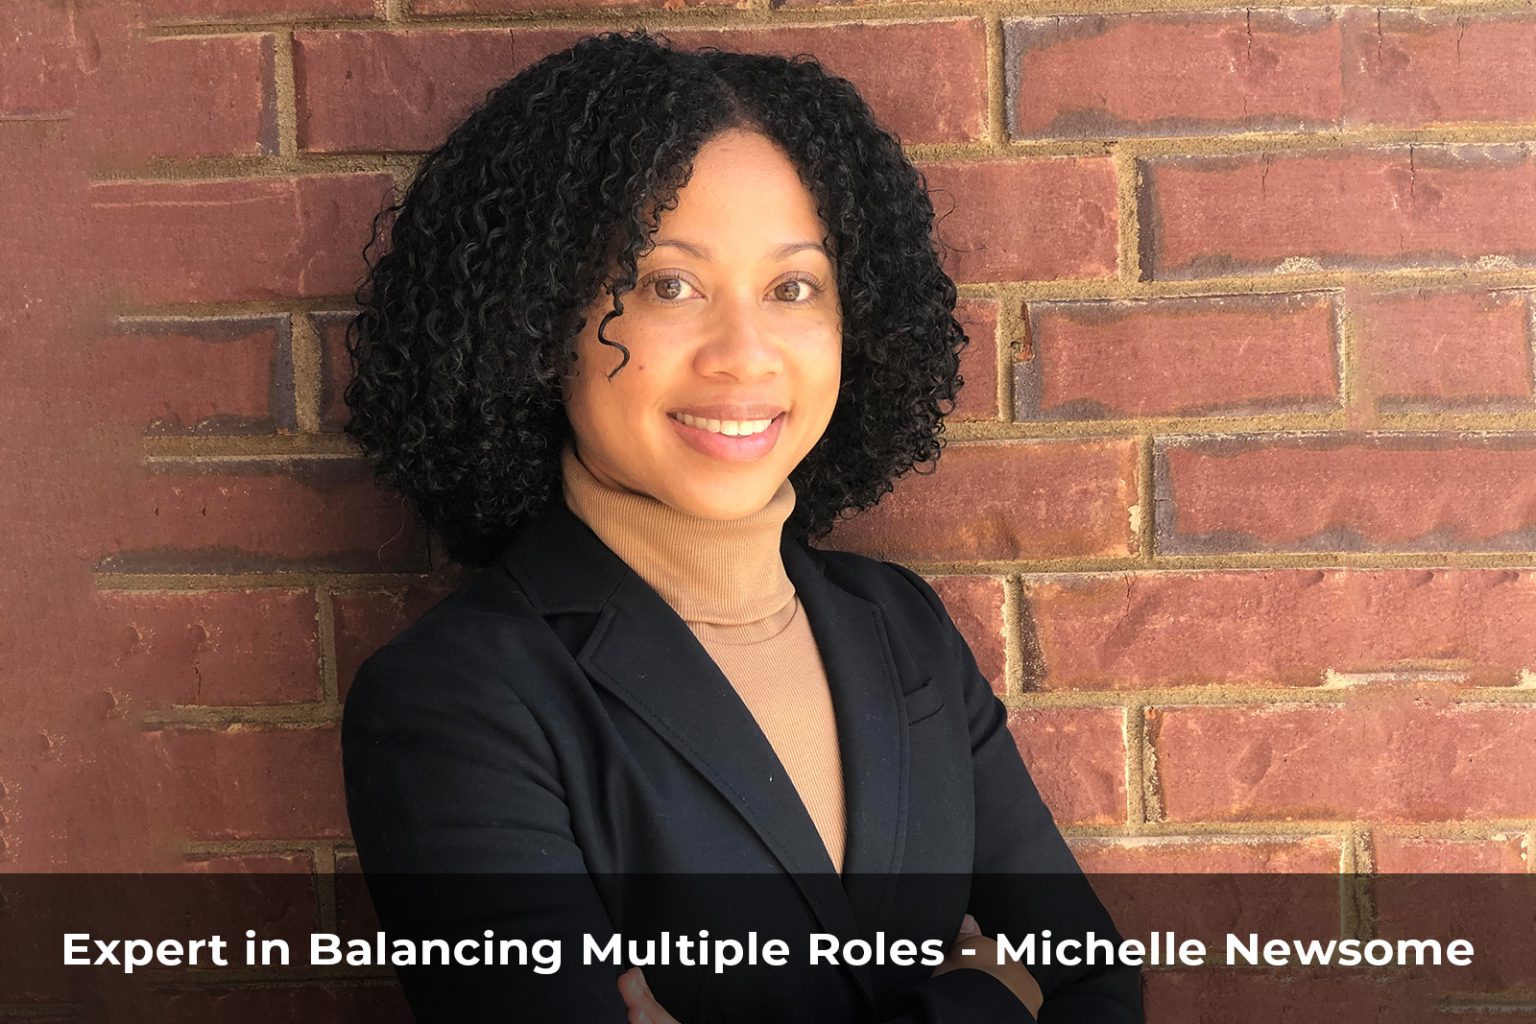 Exper in Balancing Multiple Roles - Michelle Newsome